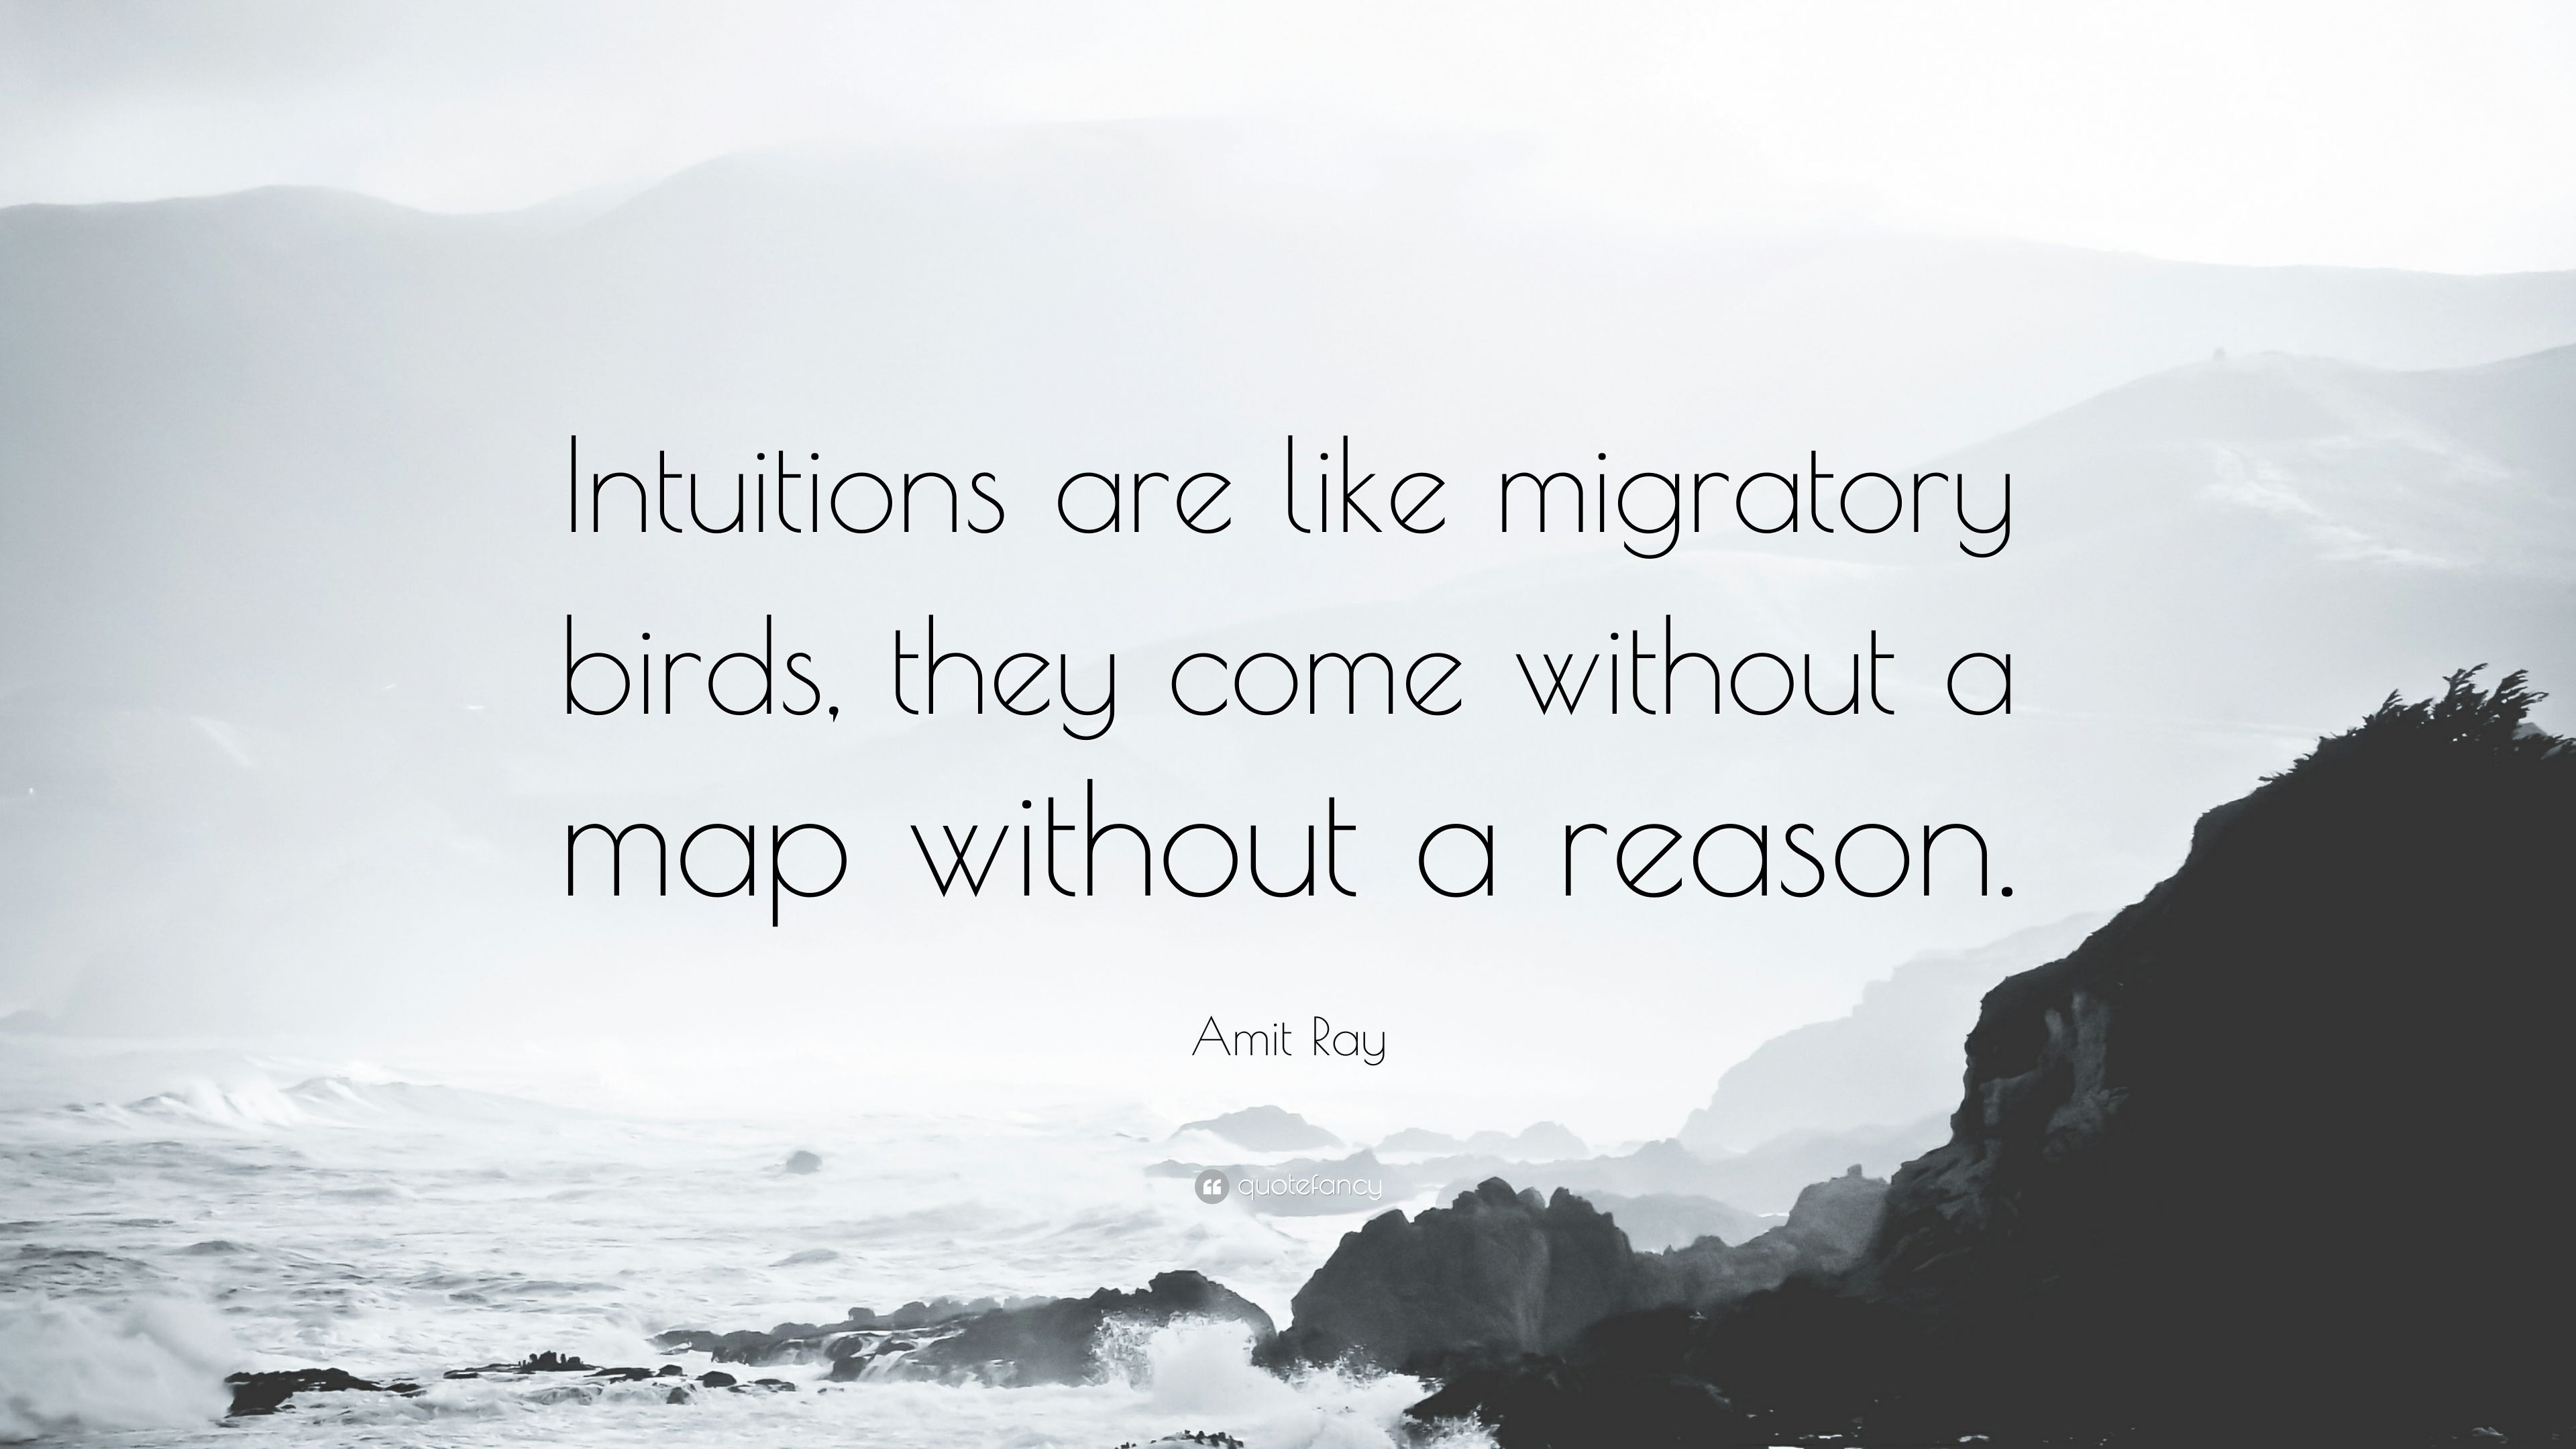 Amit Ray Quote: “Intuitions are like migratory birds, they come